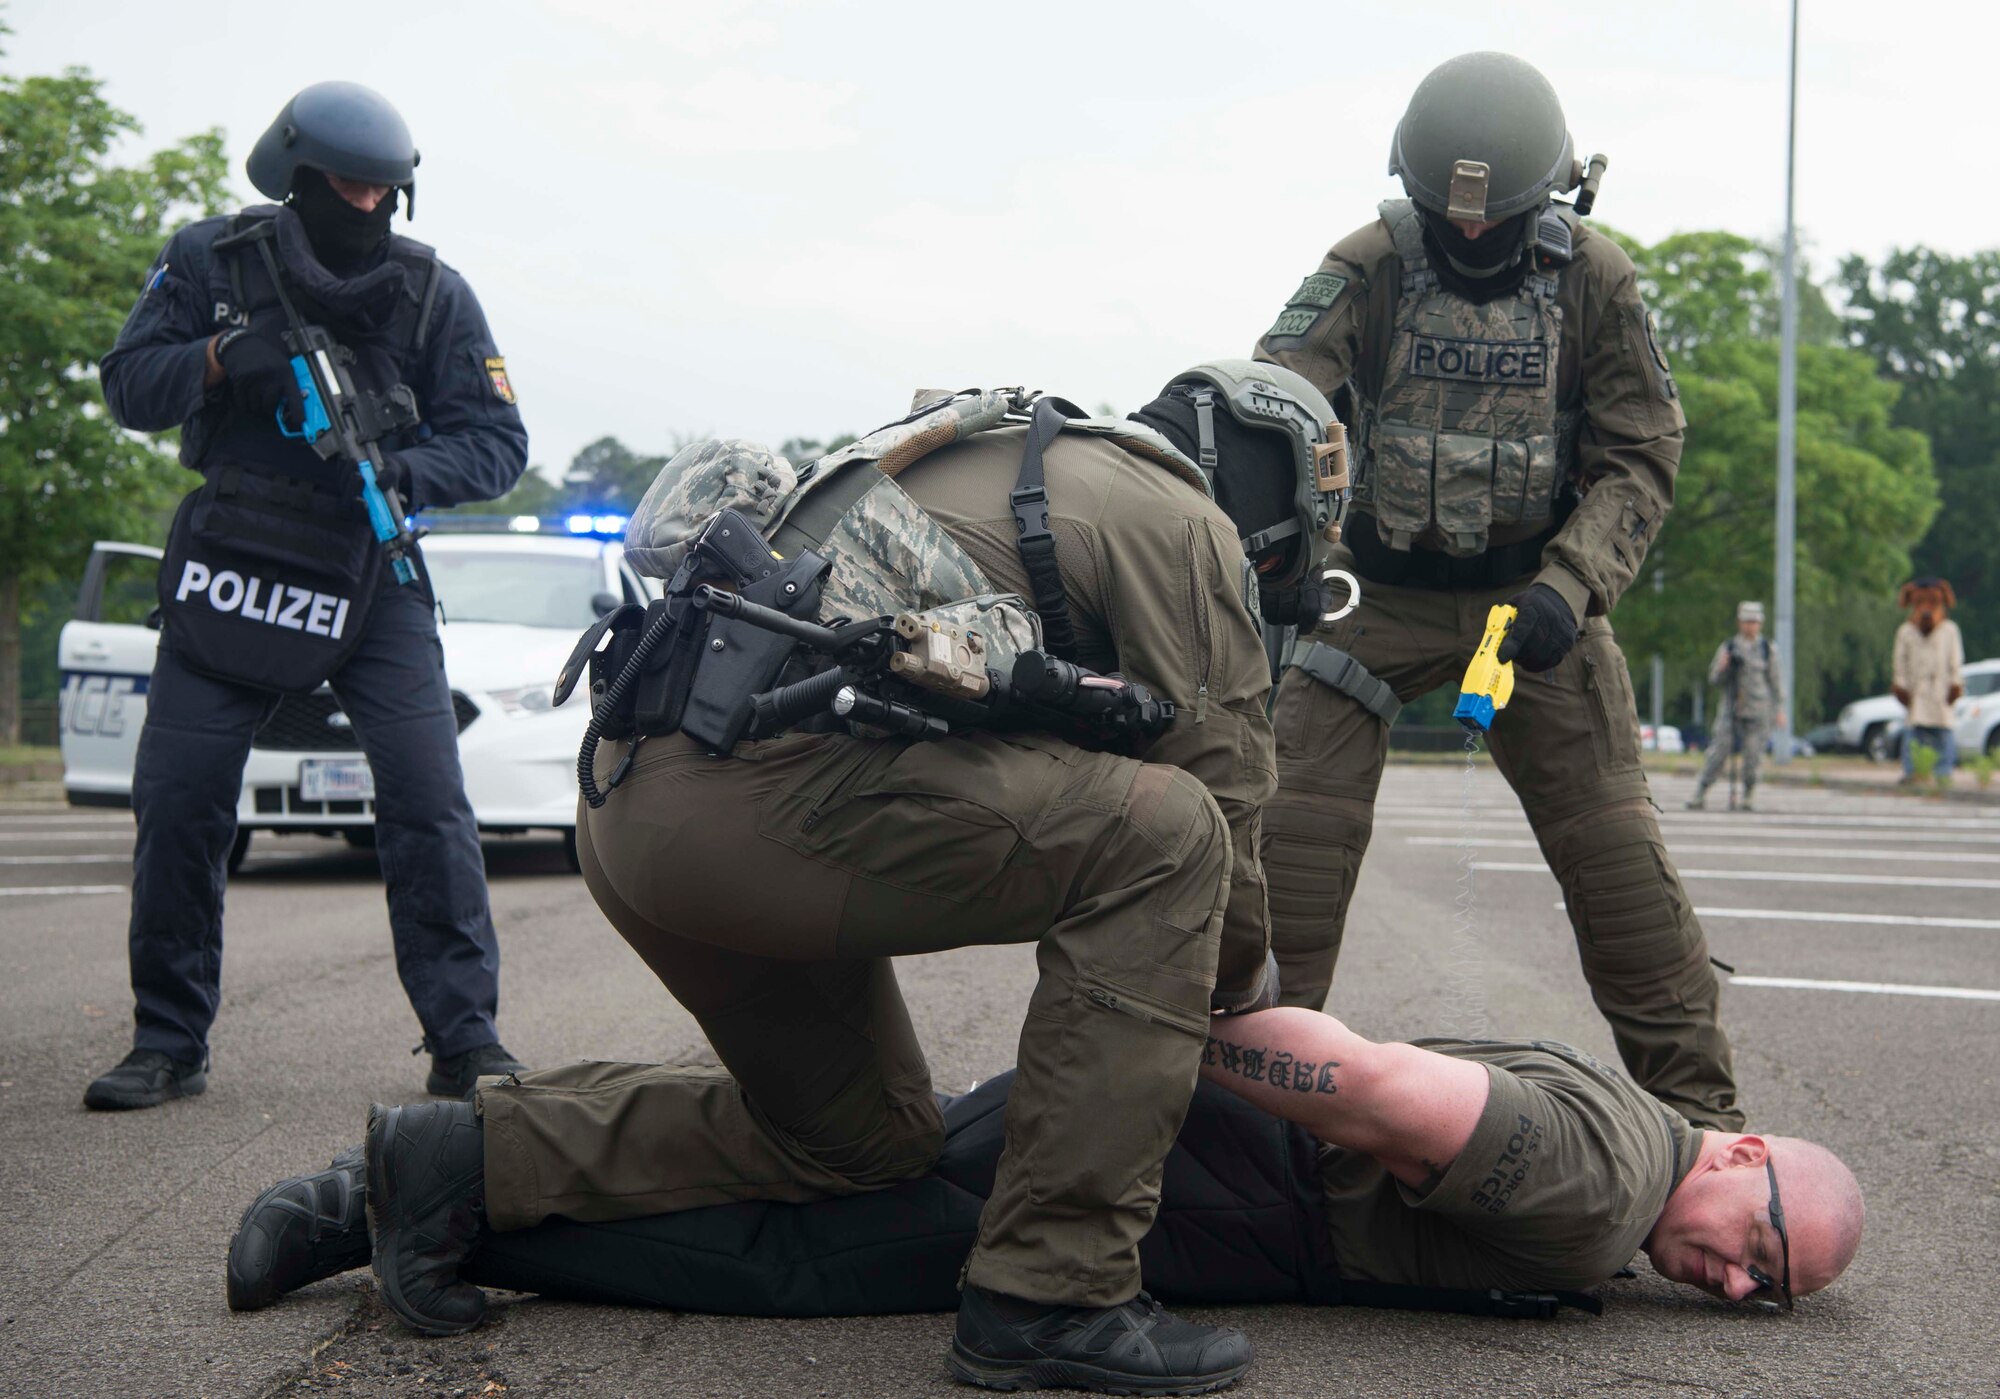 A German Polizei member, left, and two 569th U.S. Forces Police Squadron Zivilpolizei members demonstrate restraining an individual during Police Week 2018 on Ramstein Air Base, Germany, May 14, 2018. The demonstration displayed the cooperation and capabilities between Polizei and the 569th USFPS.